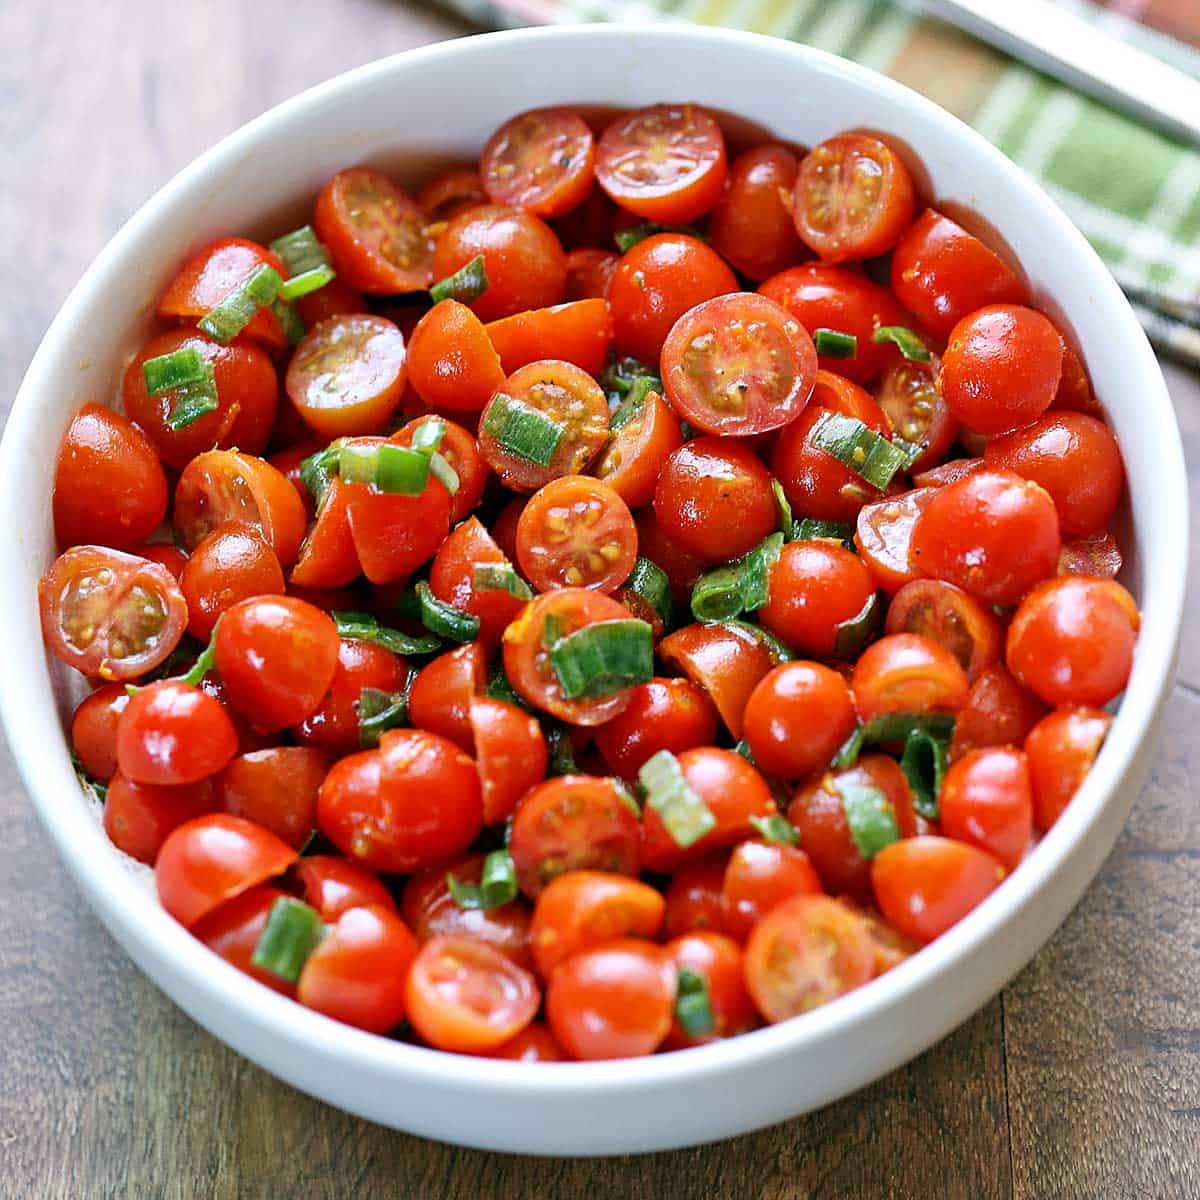 Tomato salad is served in a white bowl.